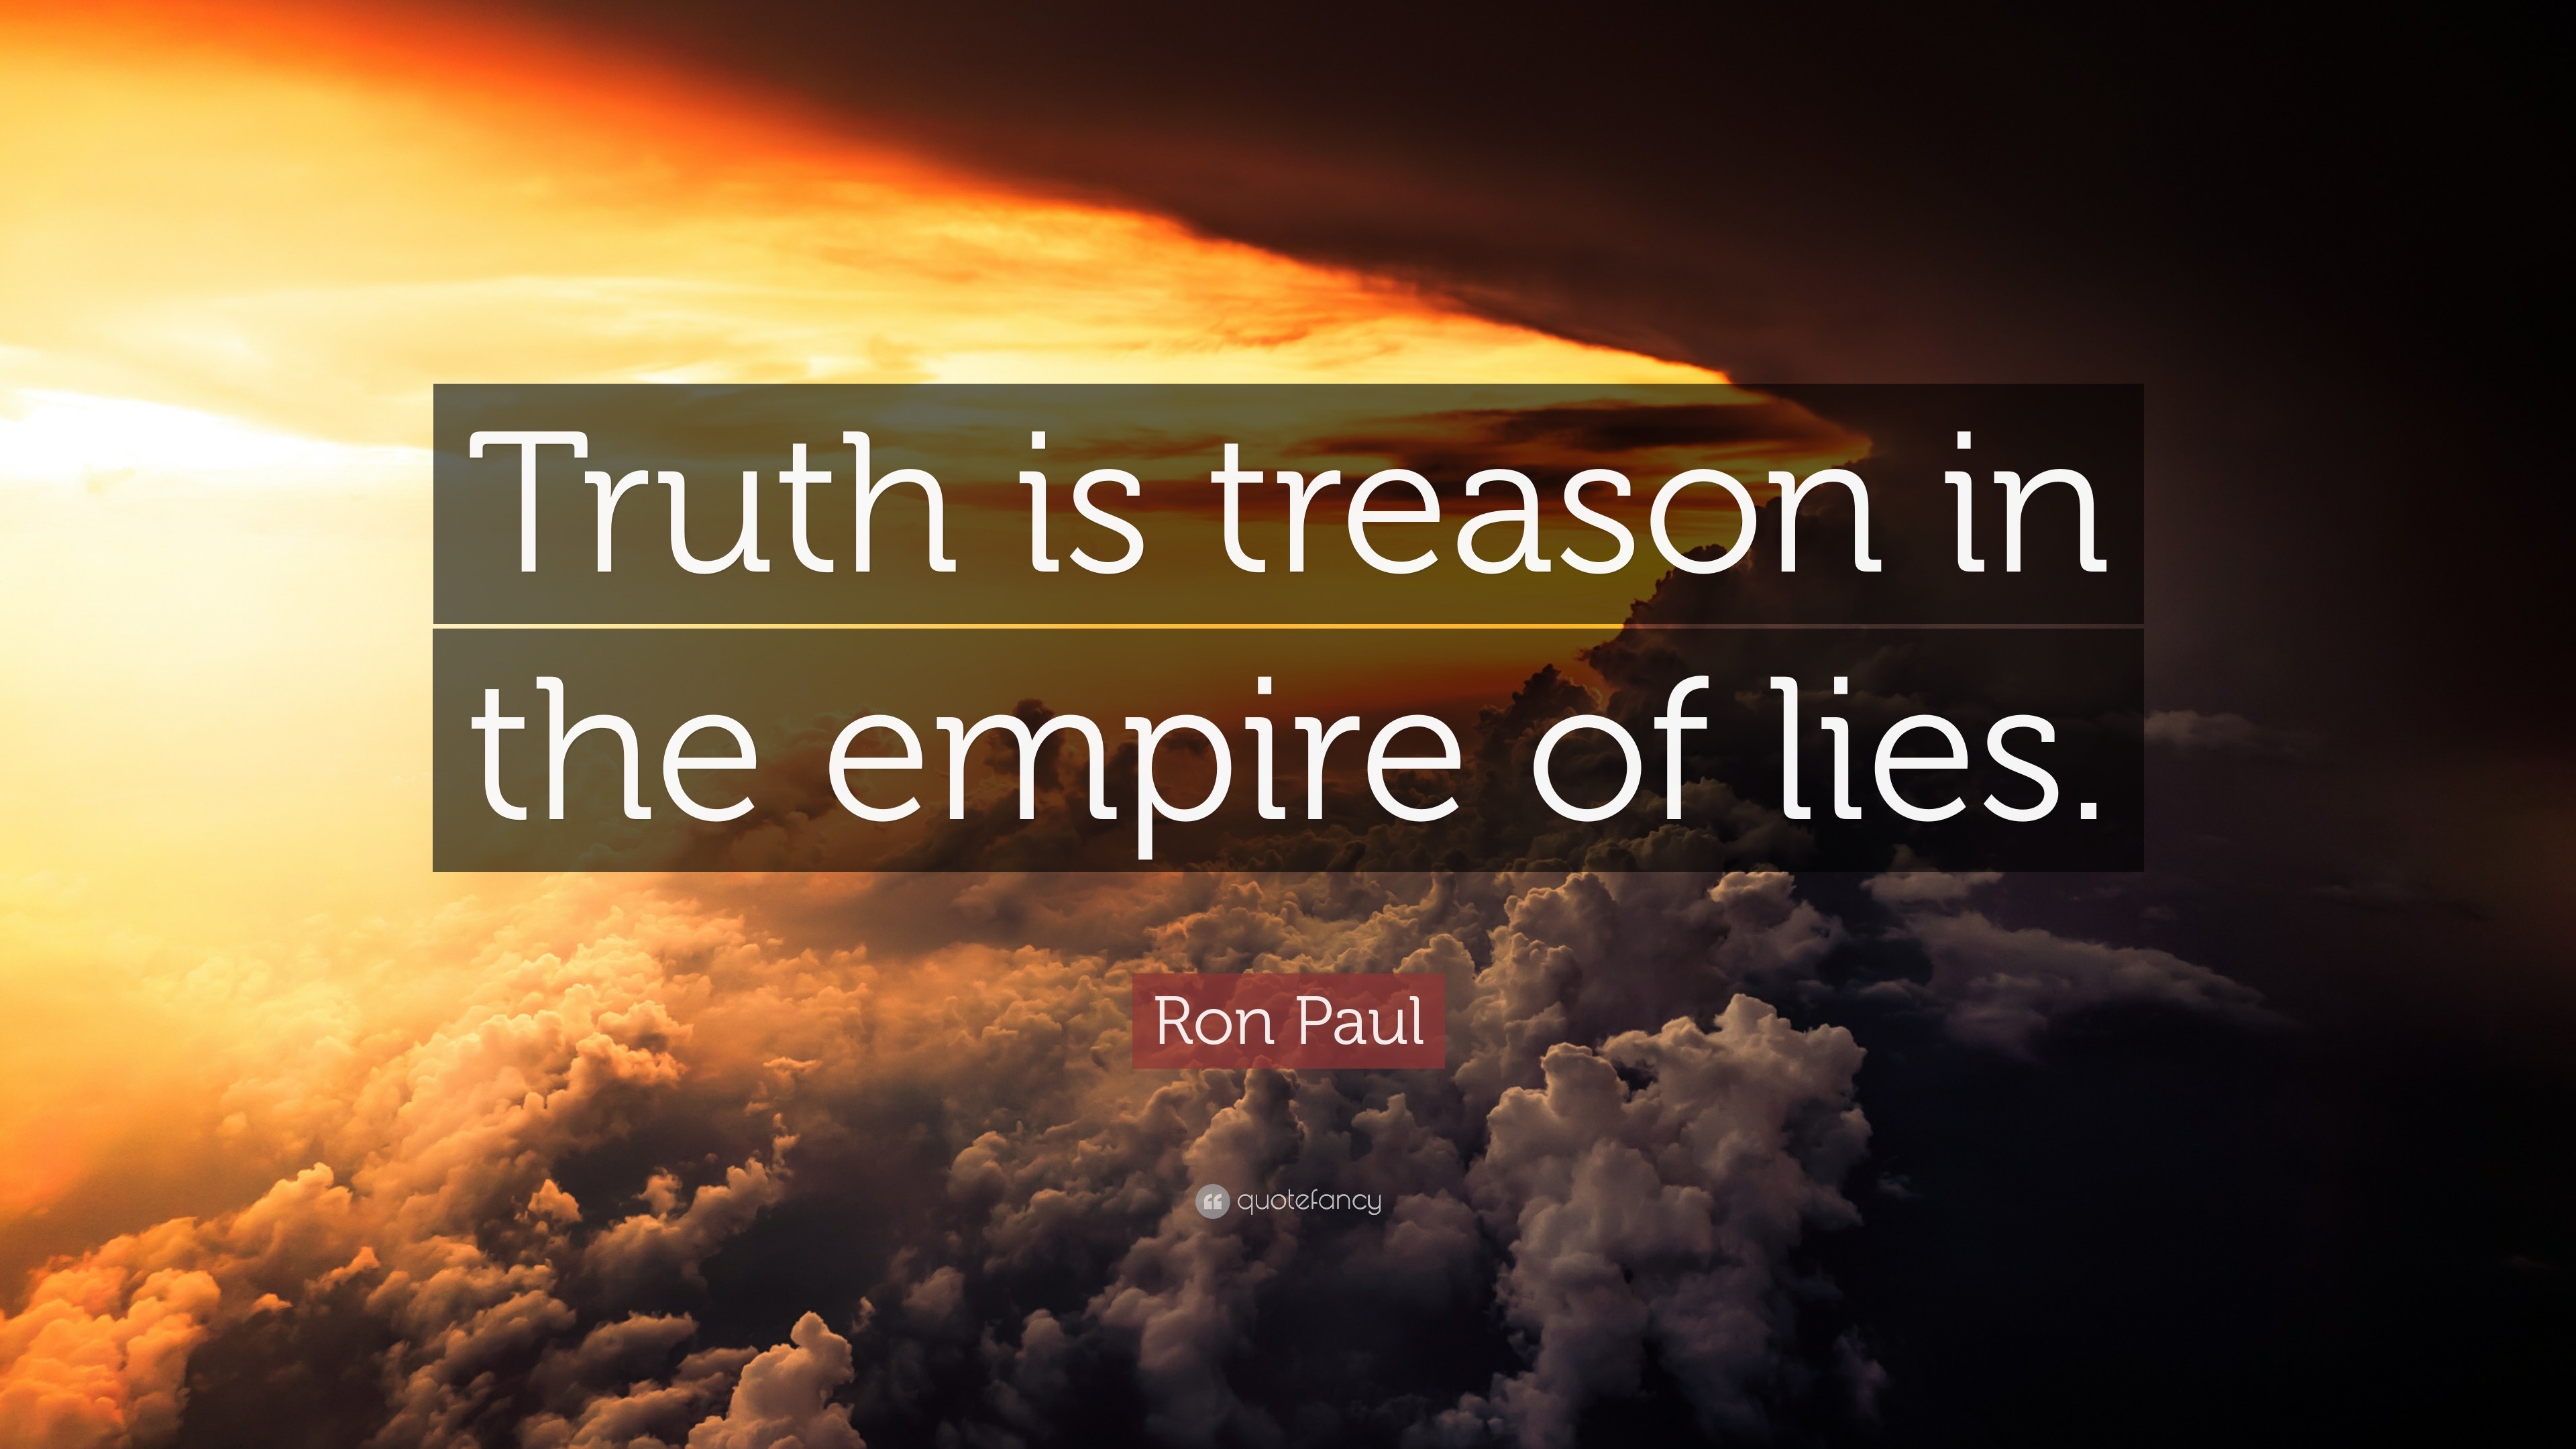 Ron Paul Quote: "Truth is treason in the empire of lies." (12 wallpapers) - Quotefancy